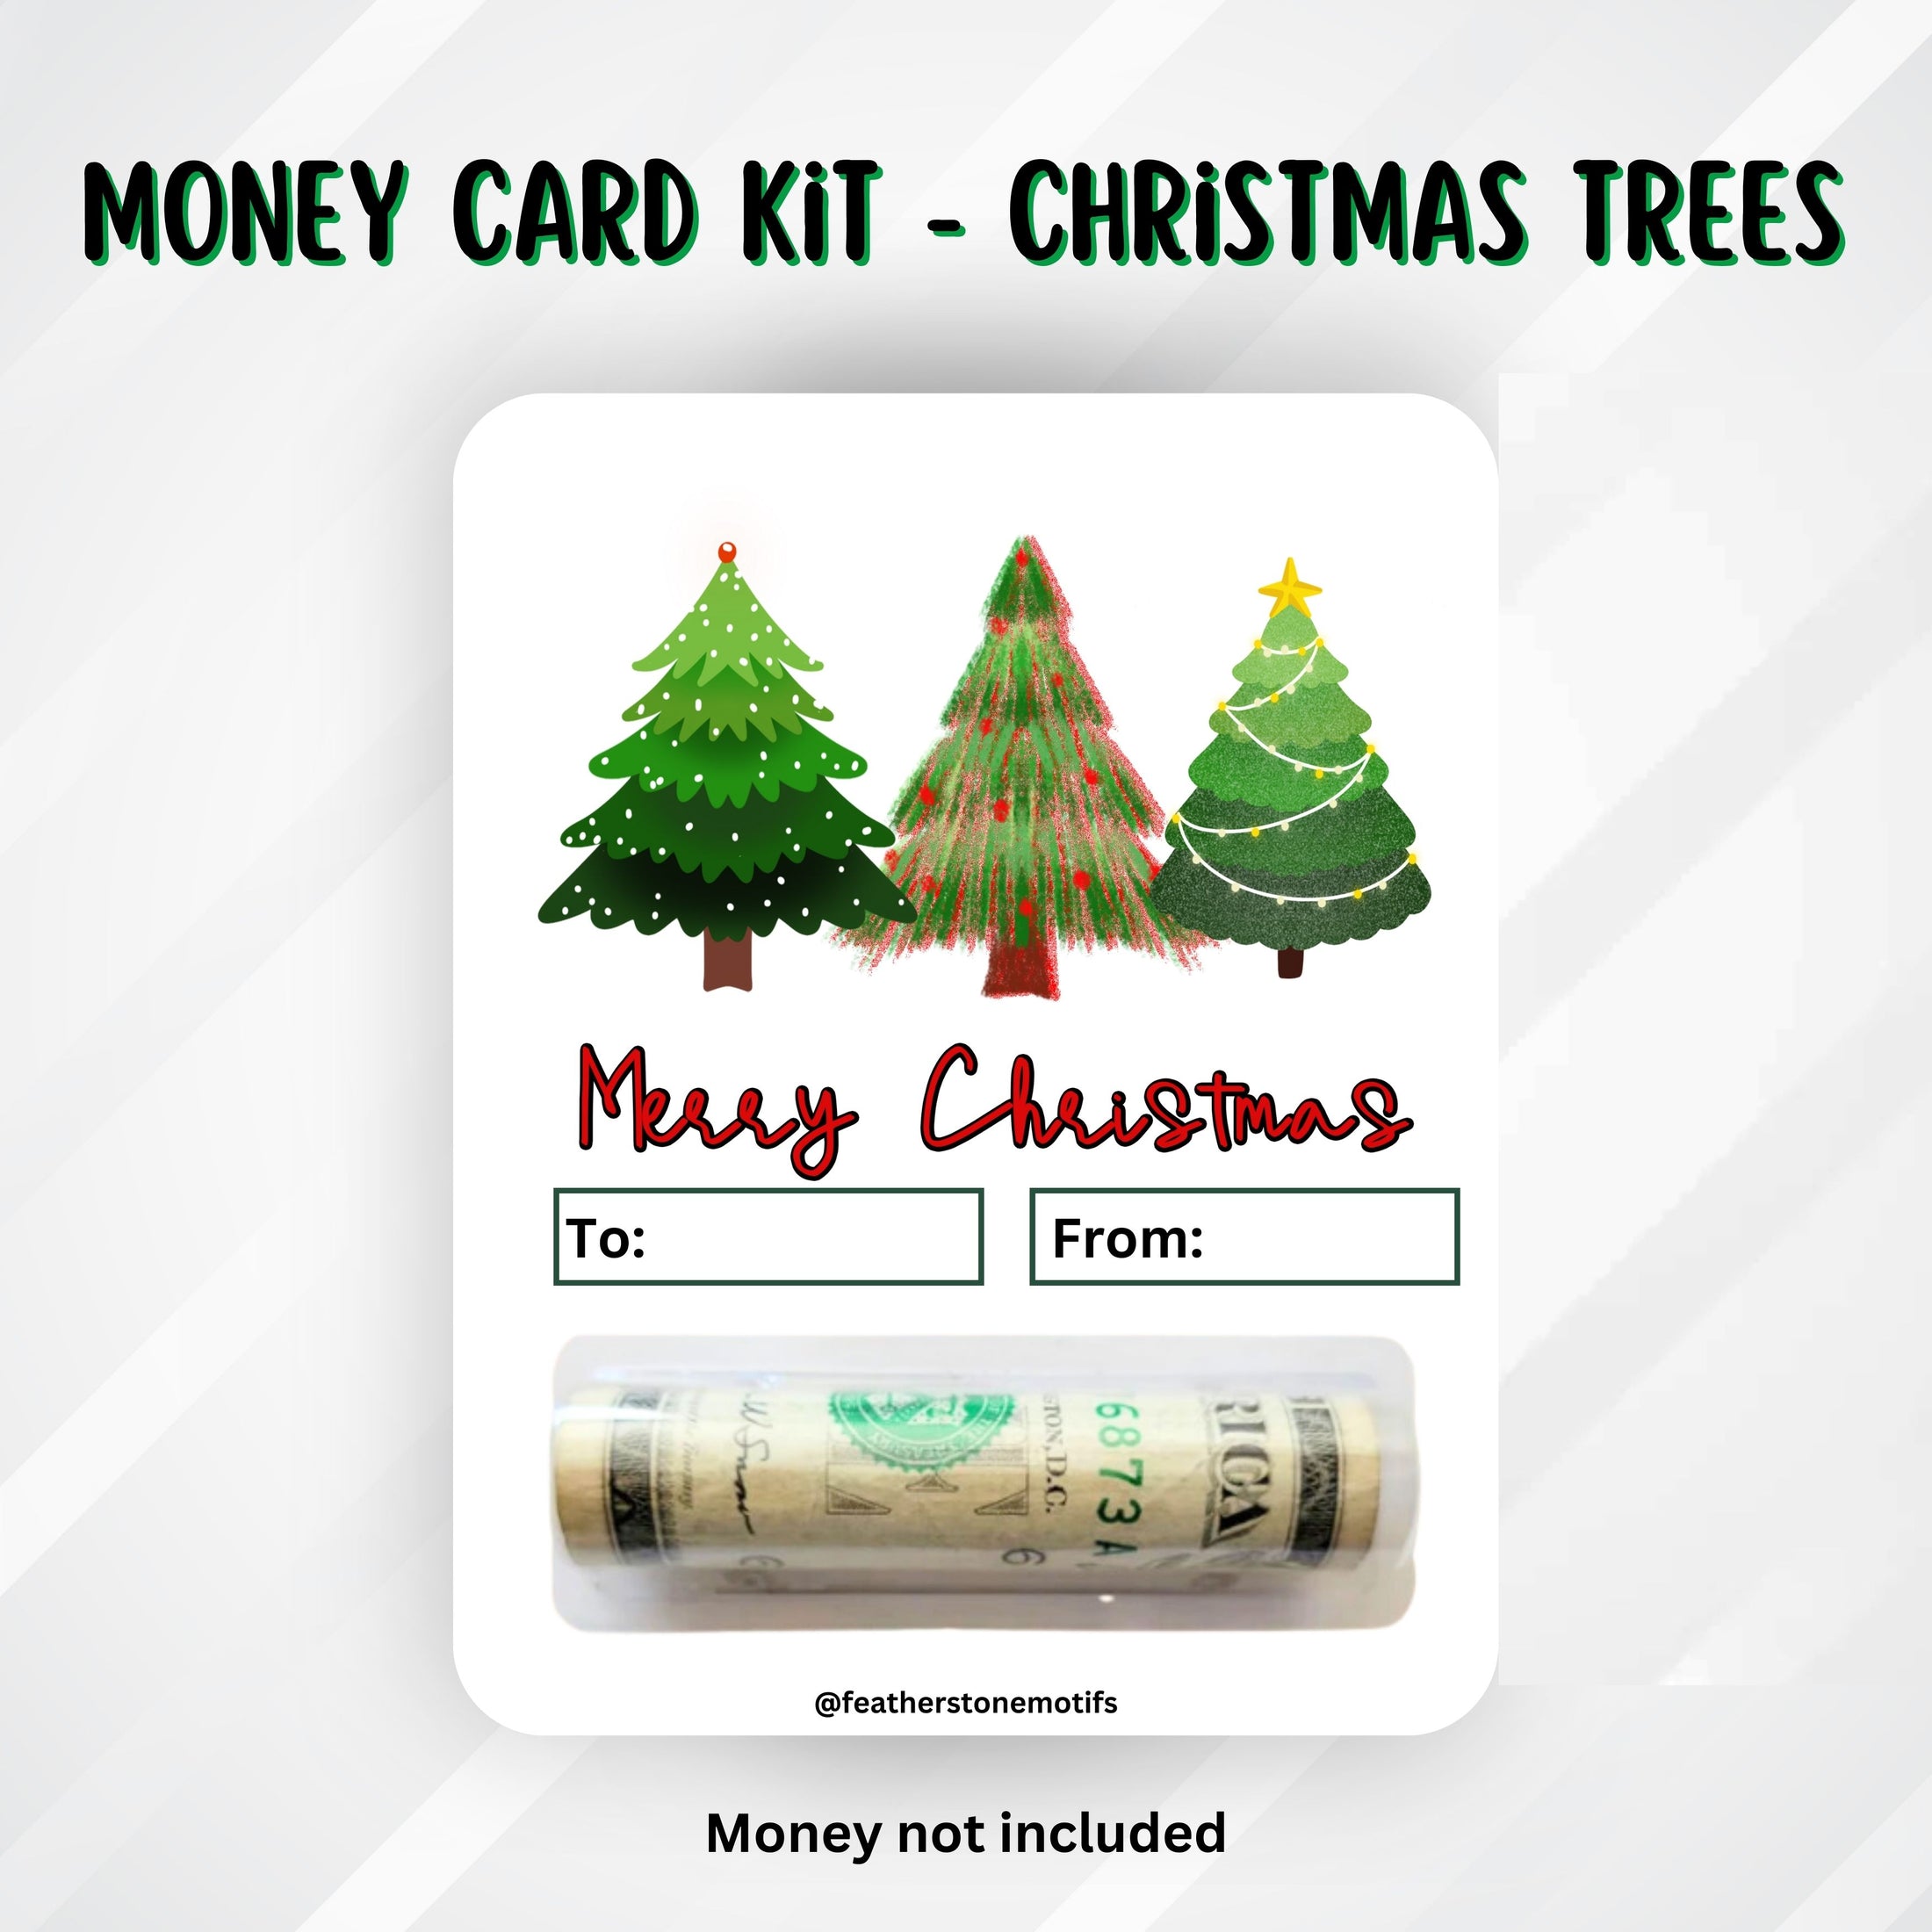 This image shows the money tube attached to the Christmas Trees Money Card.